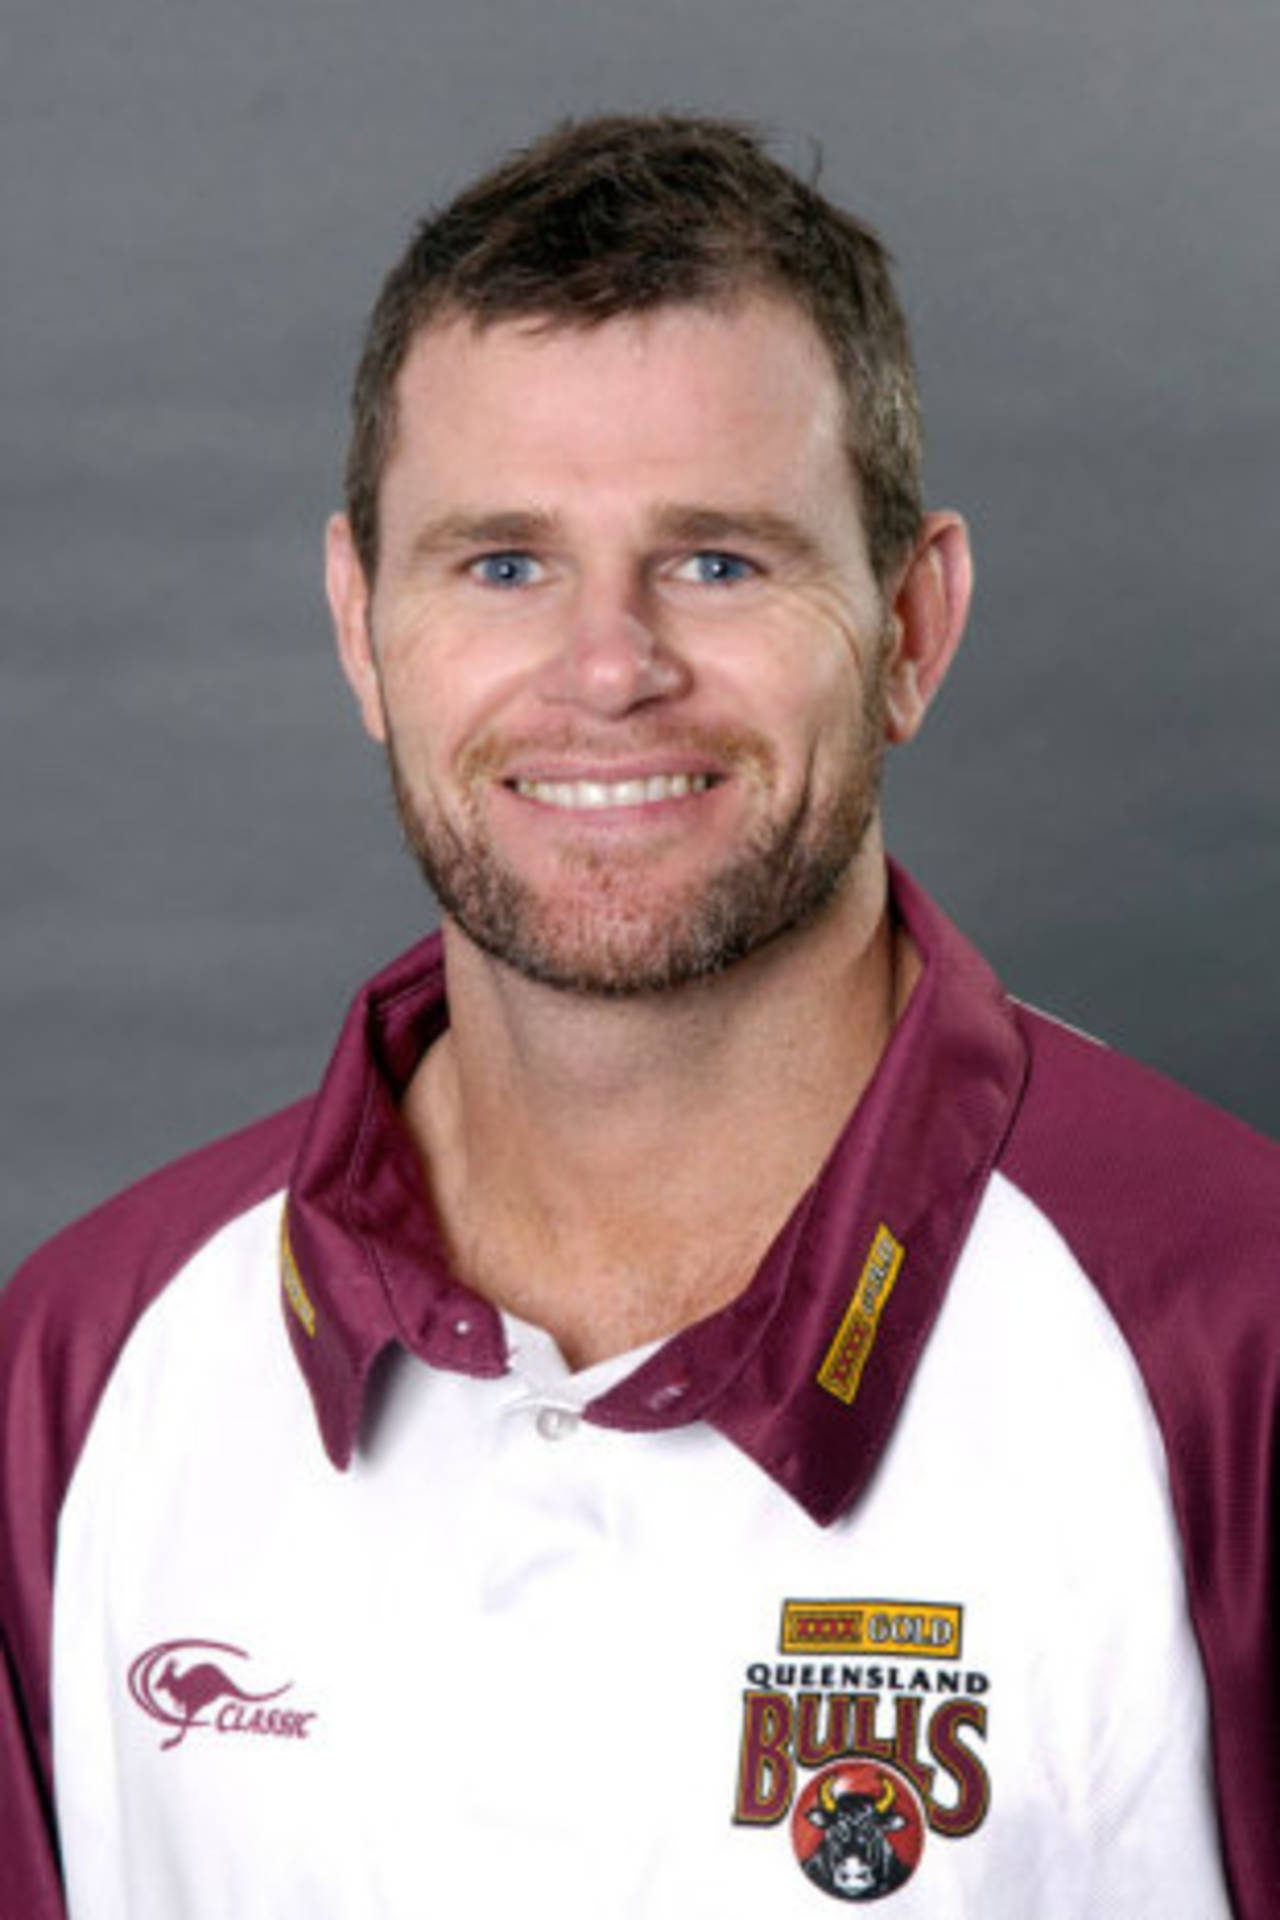 Queensland will look to Chris Swan's swing at the Gabba&nbsp;&nbsp;&bull;&nbsp;&nbsp;Queensland Cricket